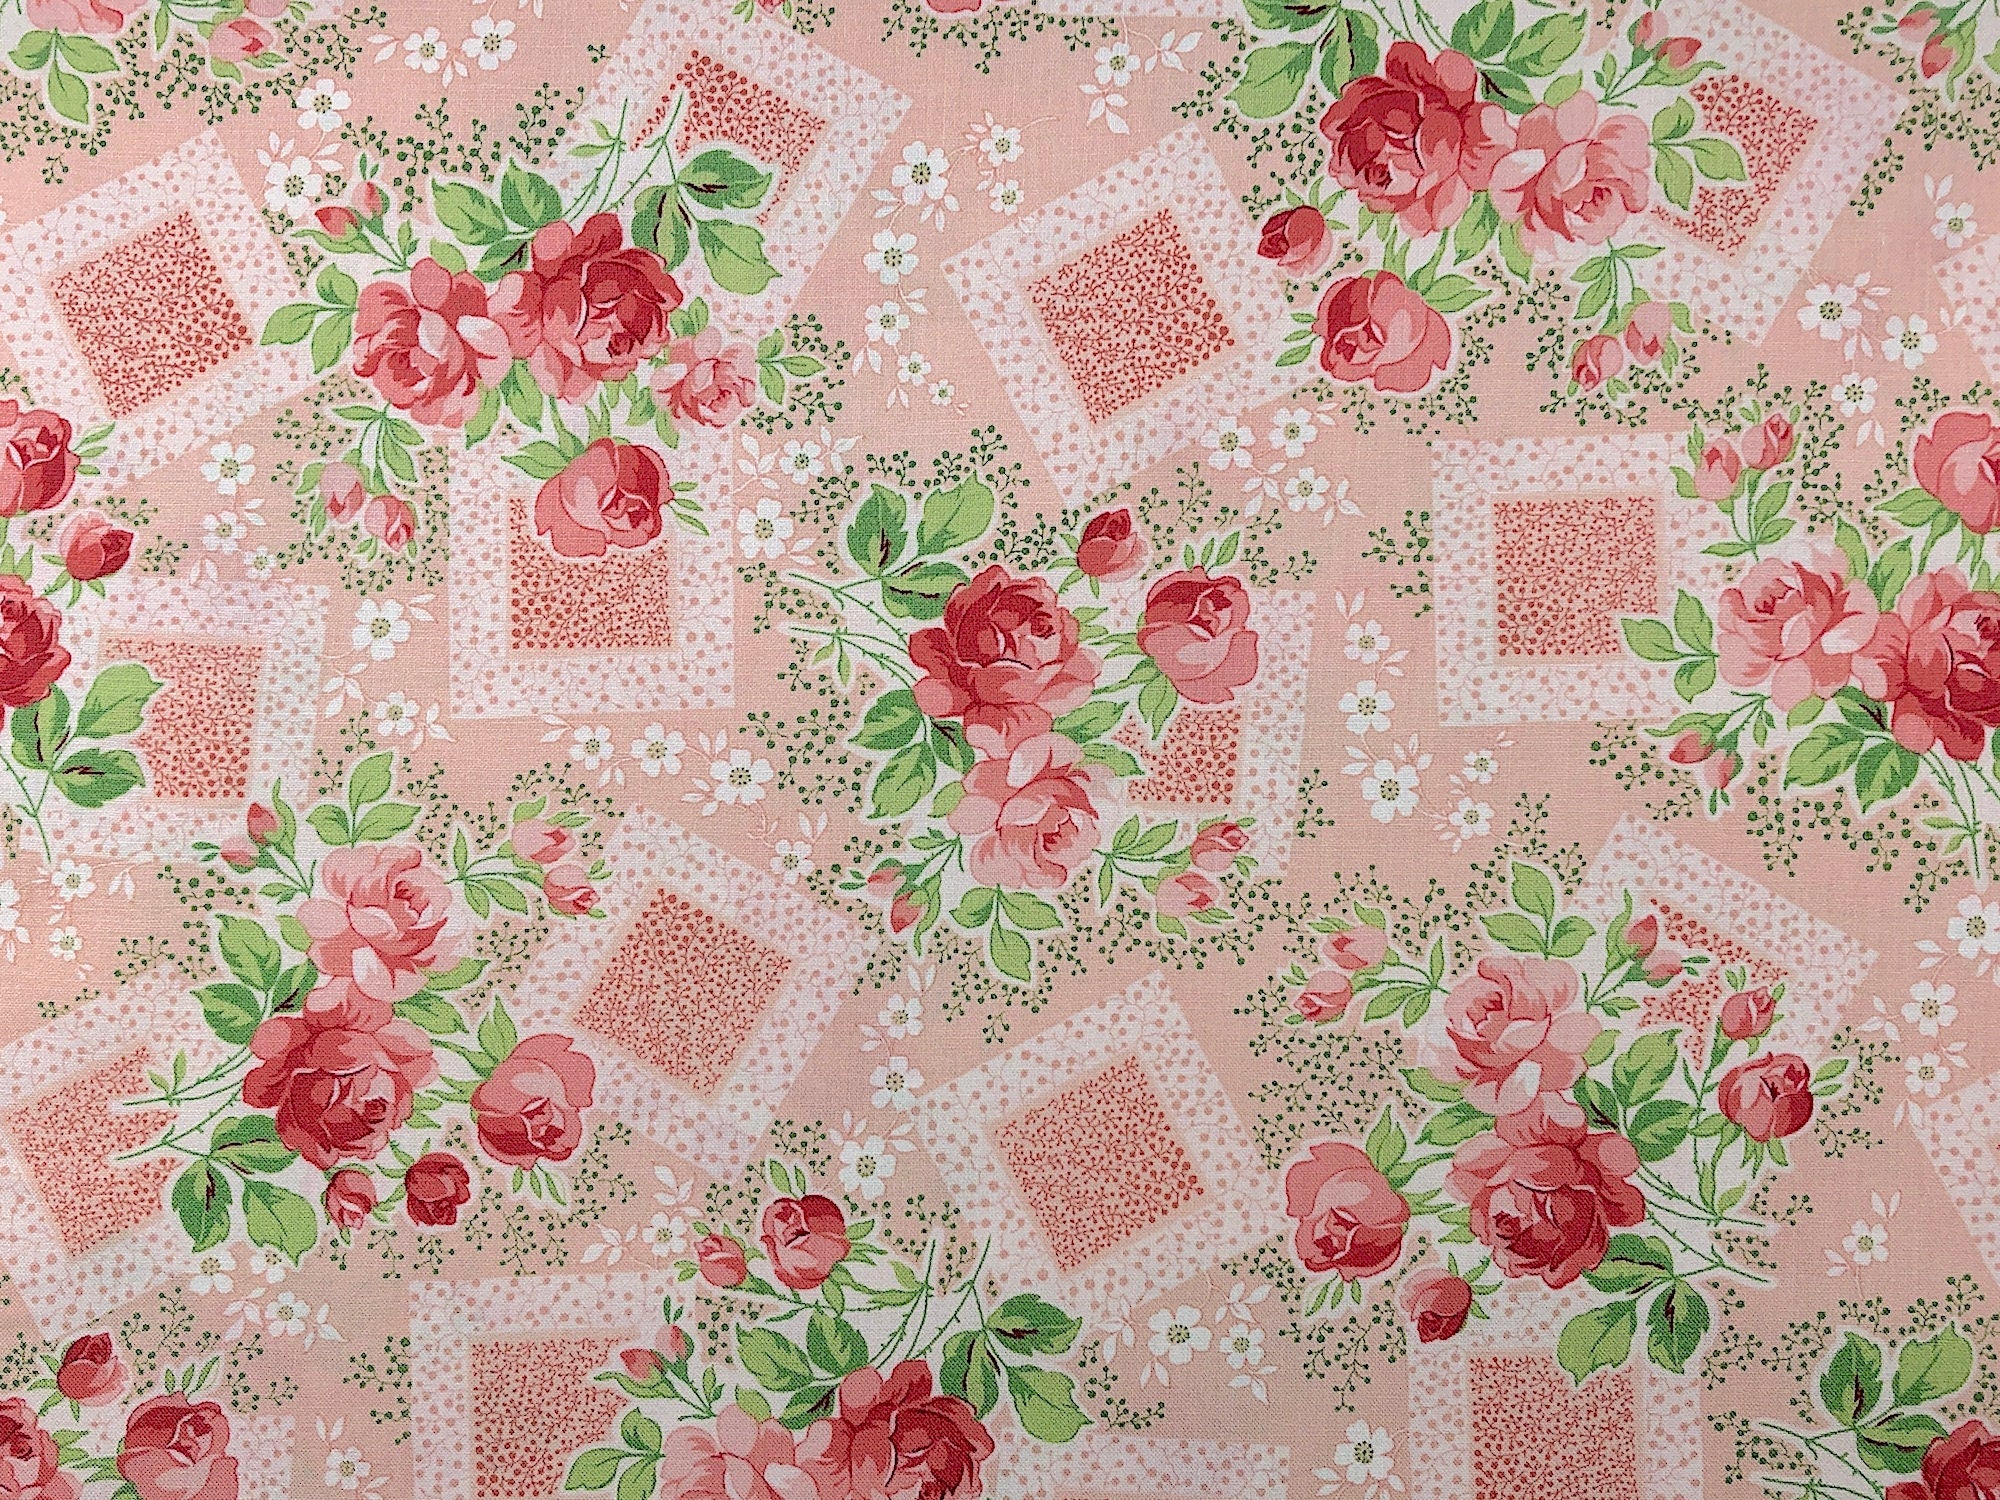 This fabric is called Violets Garden and is covered with peach flowers